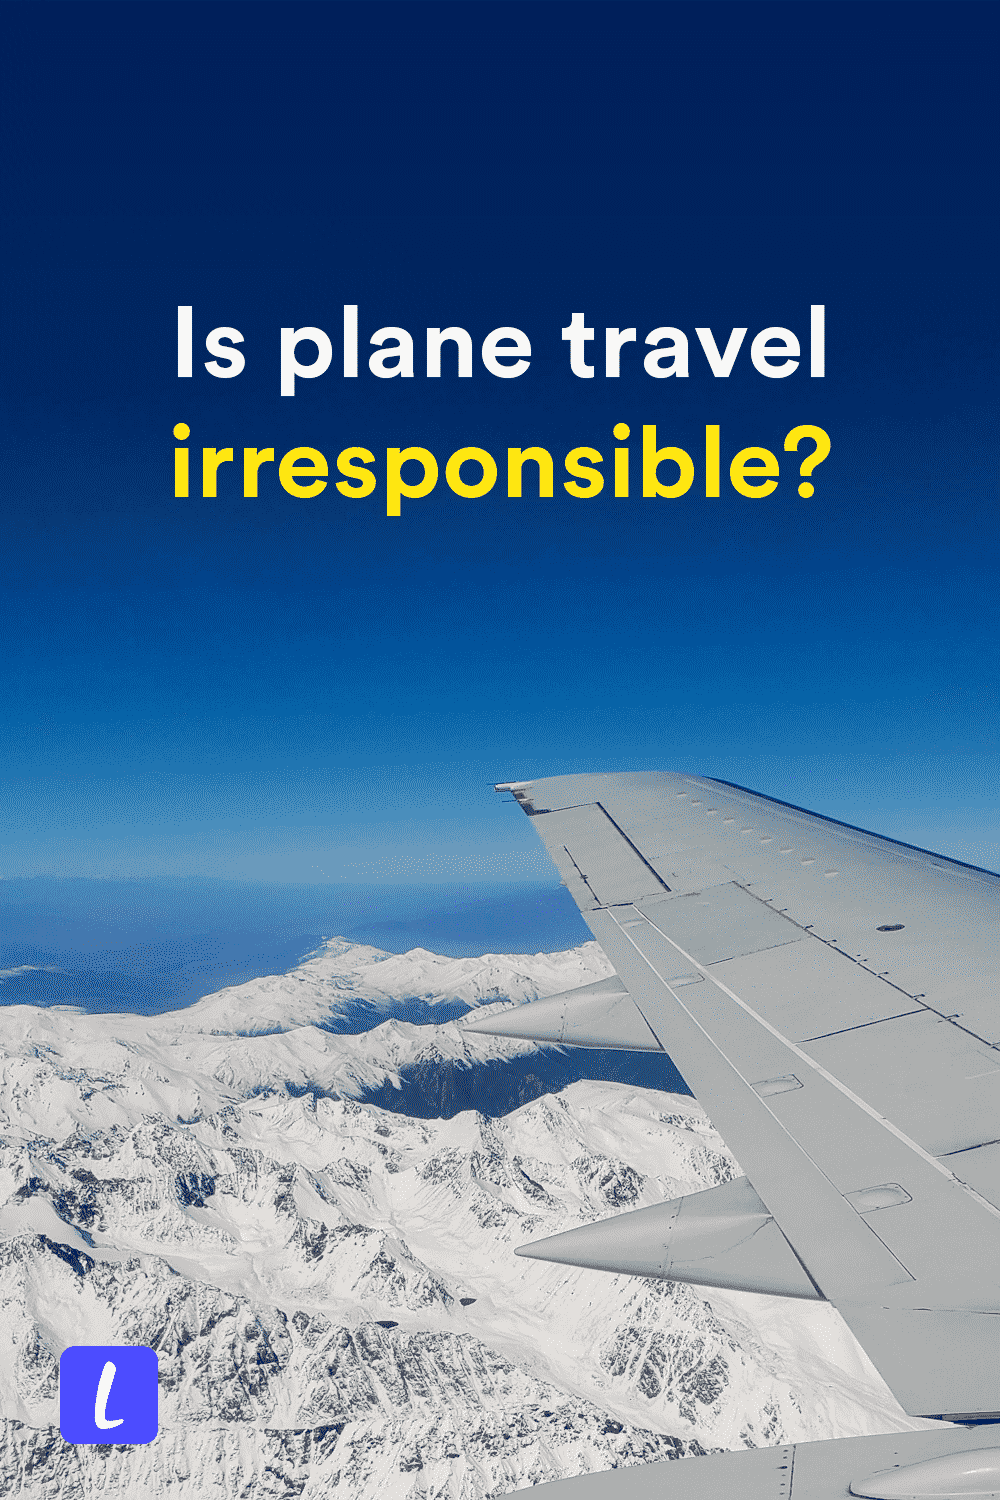 Should we feel guilty about flying? We know plane travel is bad for the environment, but does that mean we should stop flying? Is it ethical for responsible travelers to fly? Here's what travelers need to know about the environmental impact of flying... and who is most responsible.